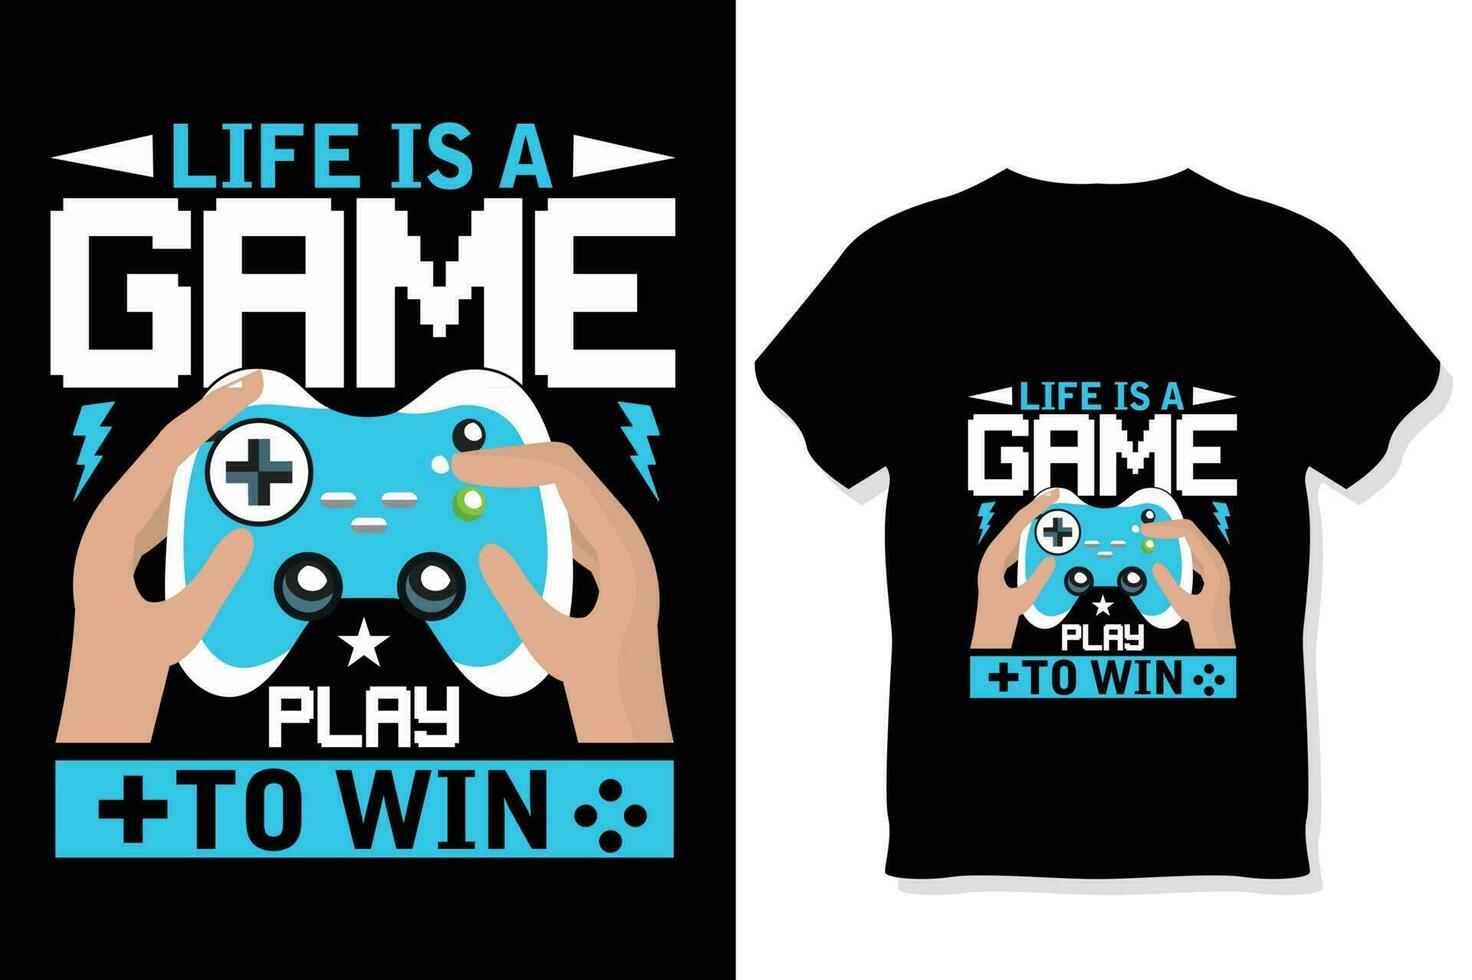 life is a game play to win gaming quotes t shirt Gamer t shirt Design vector